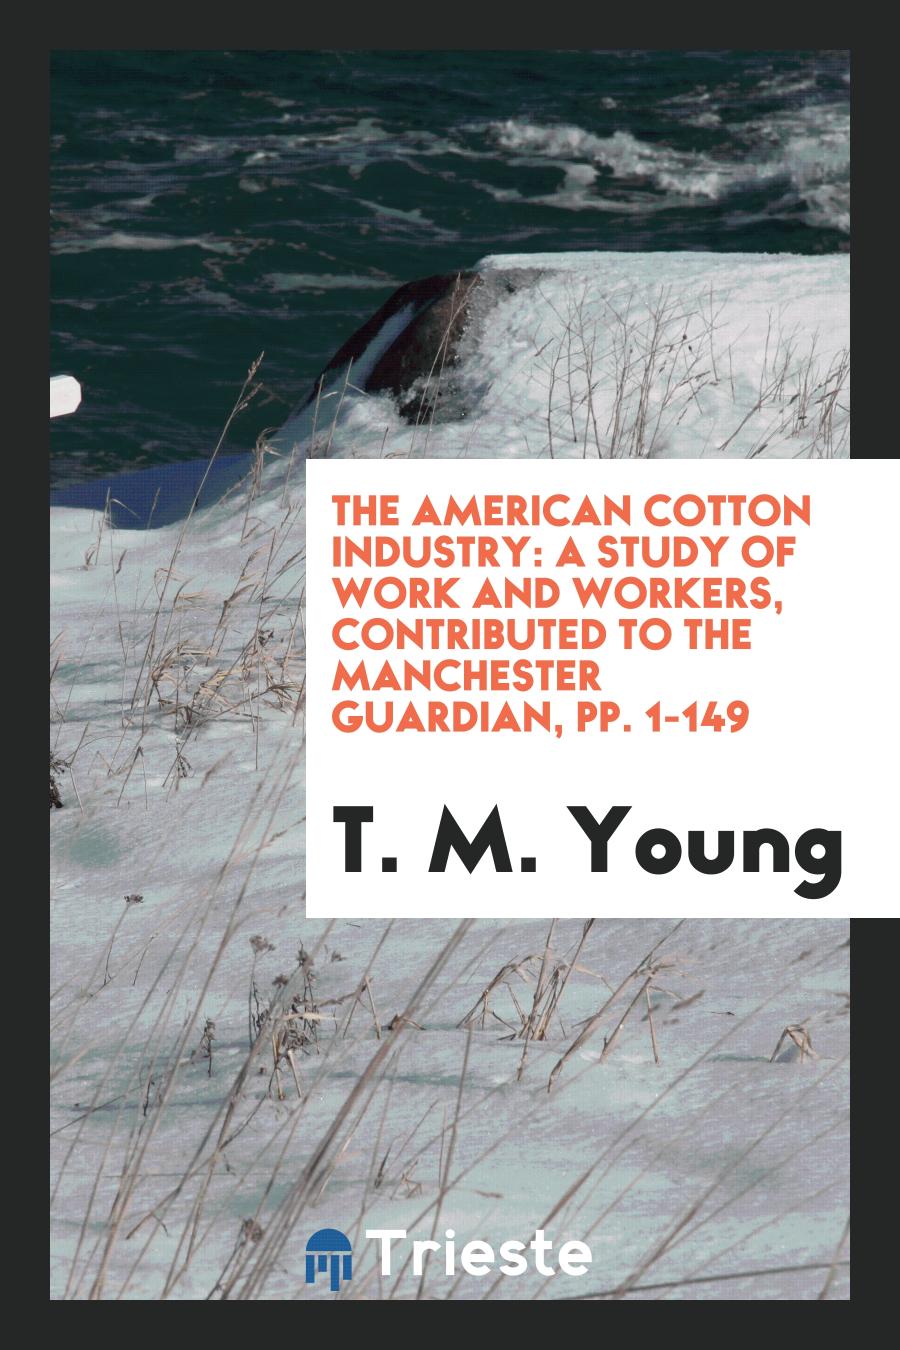 The American Cotton Industry: A Study of Work and Workers, Contributed to the Manchester Guardian, pp. 1-149